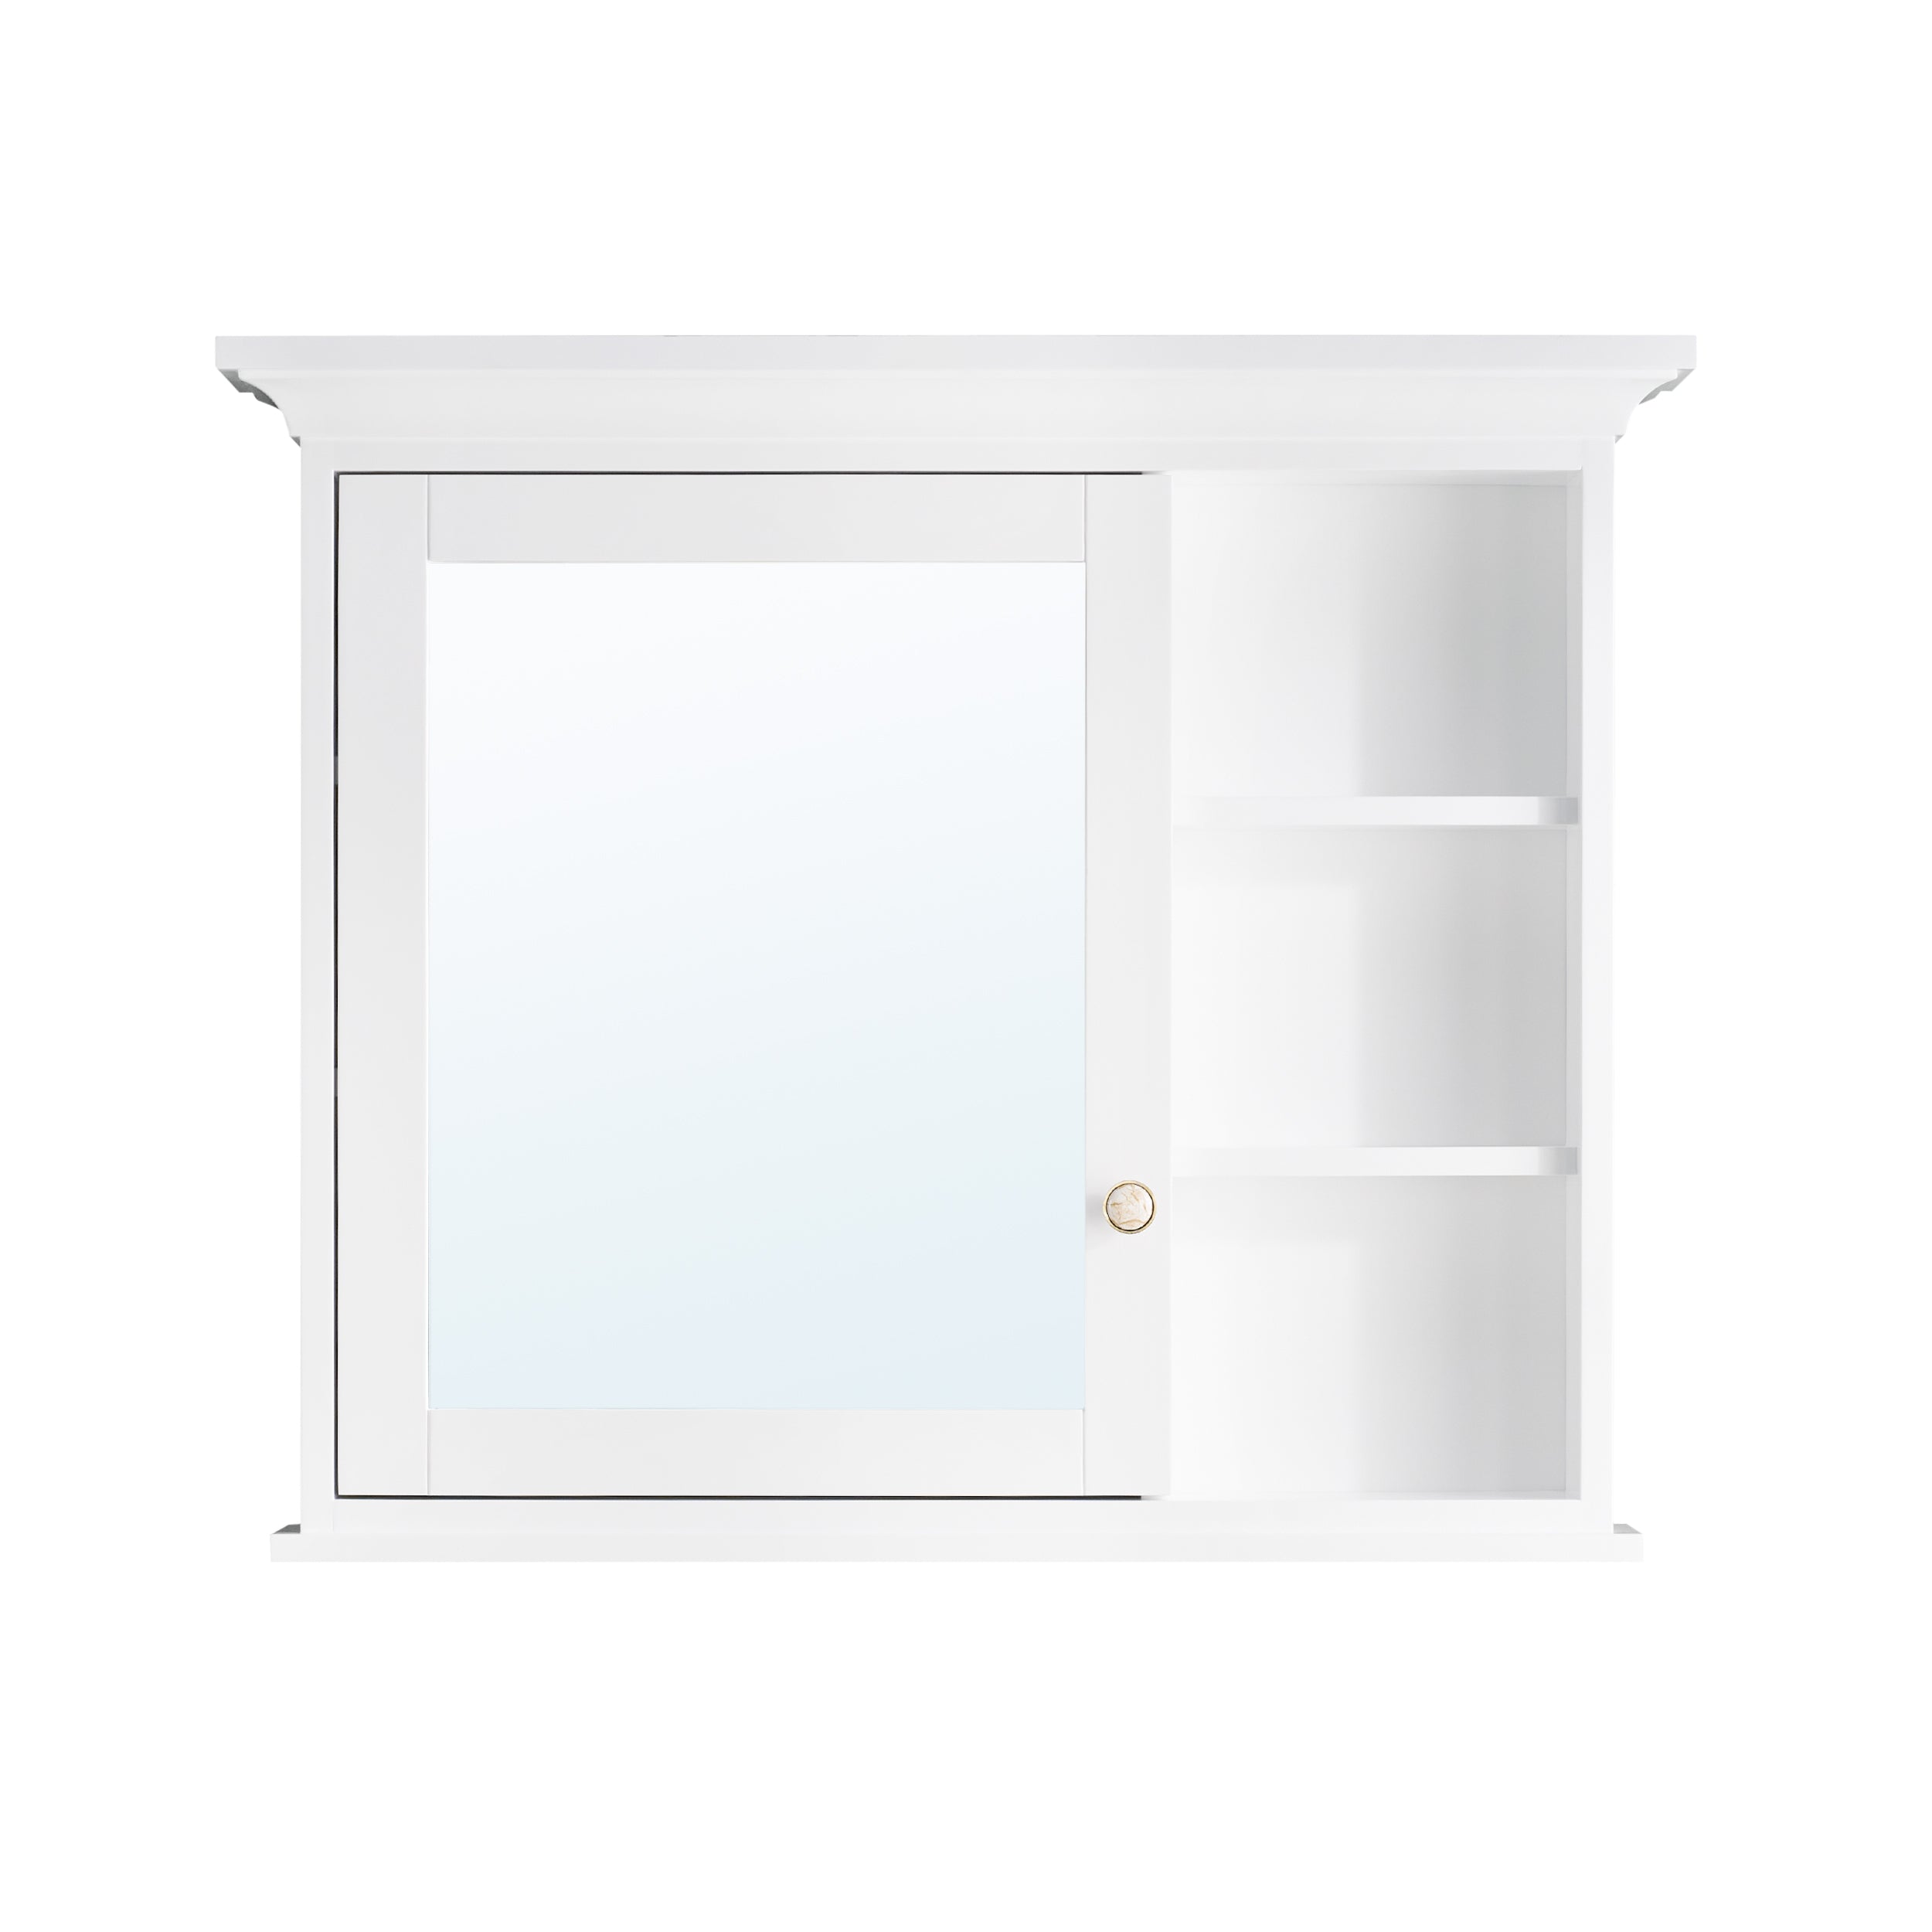 36 in.W x 30 in.H Surface-Mount Bathroom Medicine Cabinet with Mirror in White